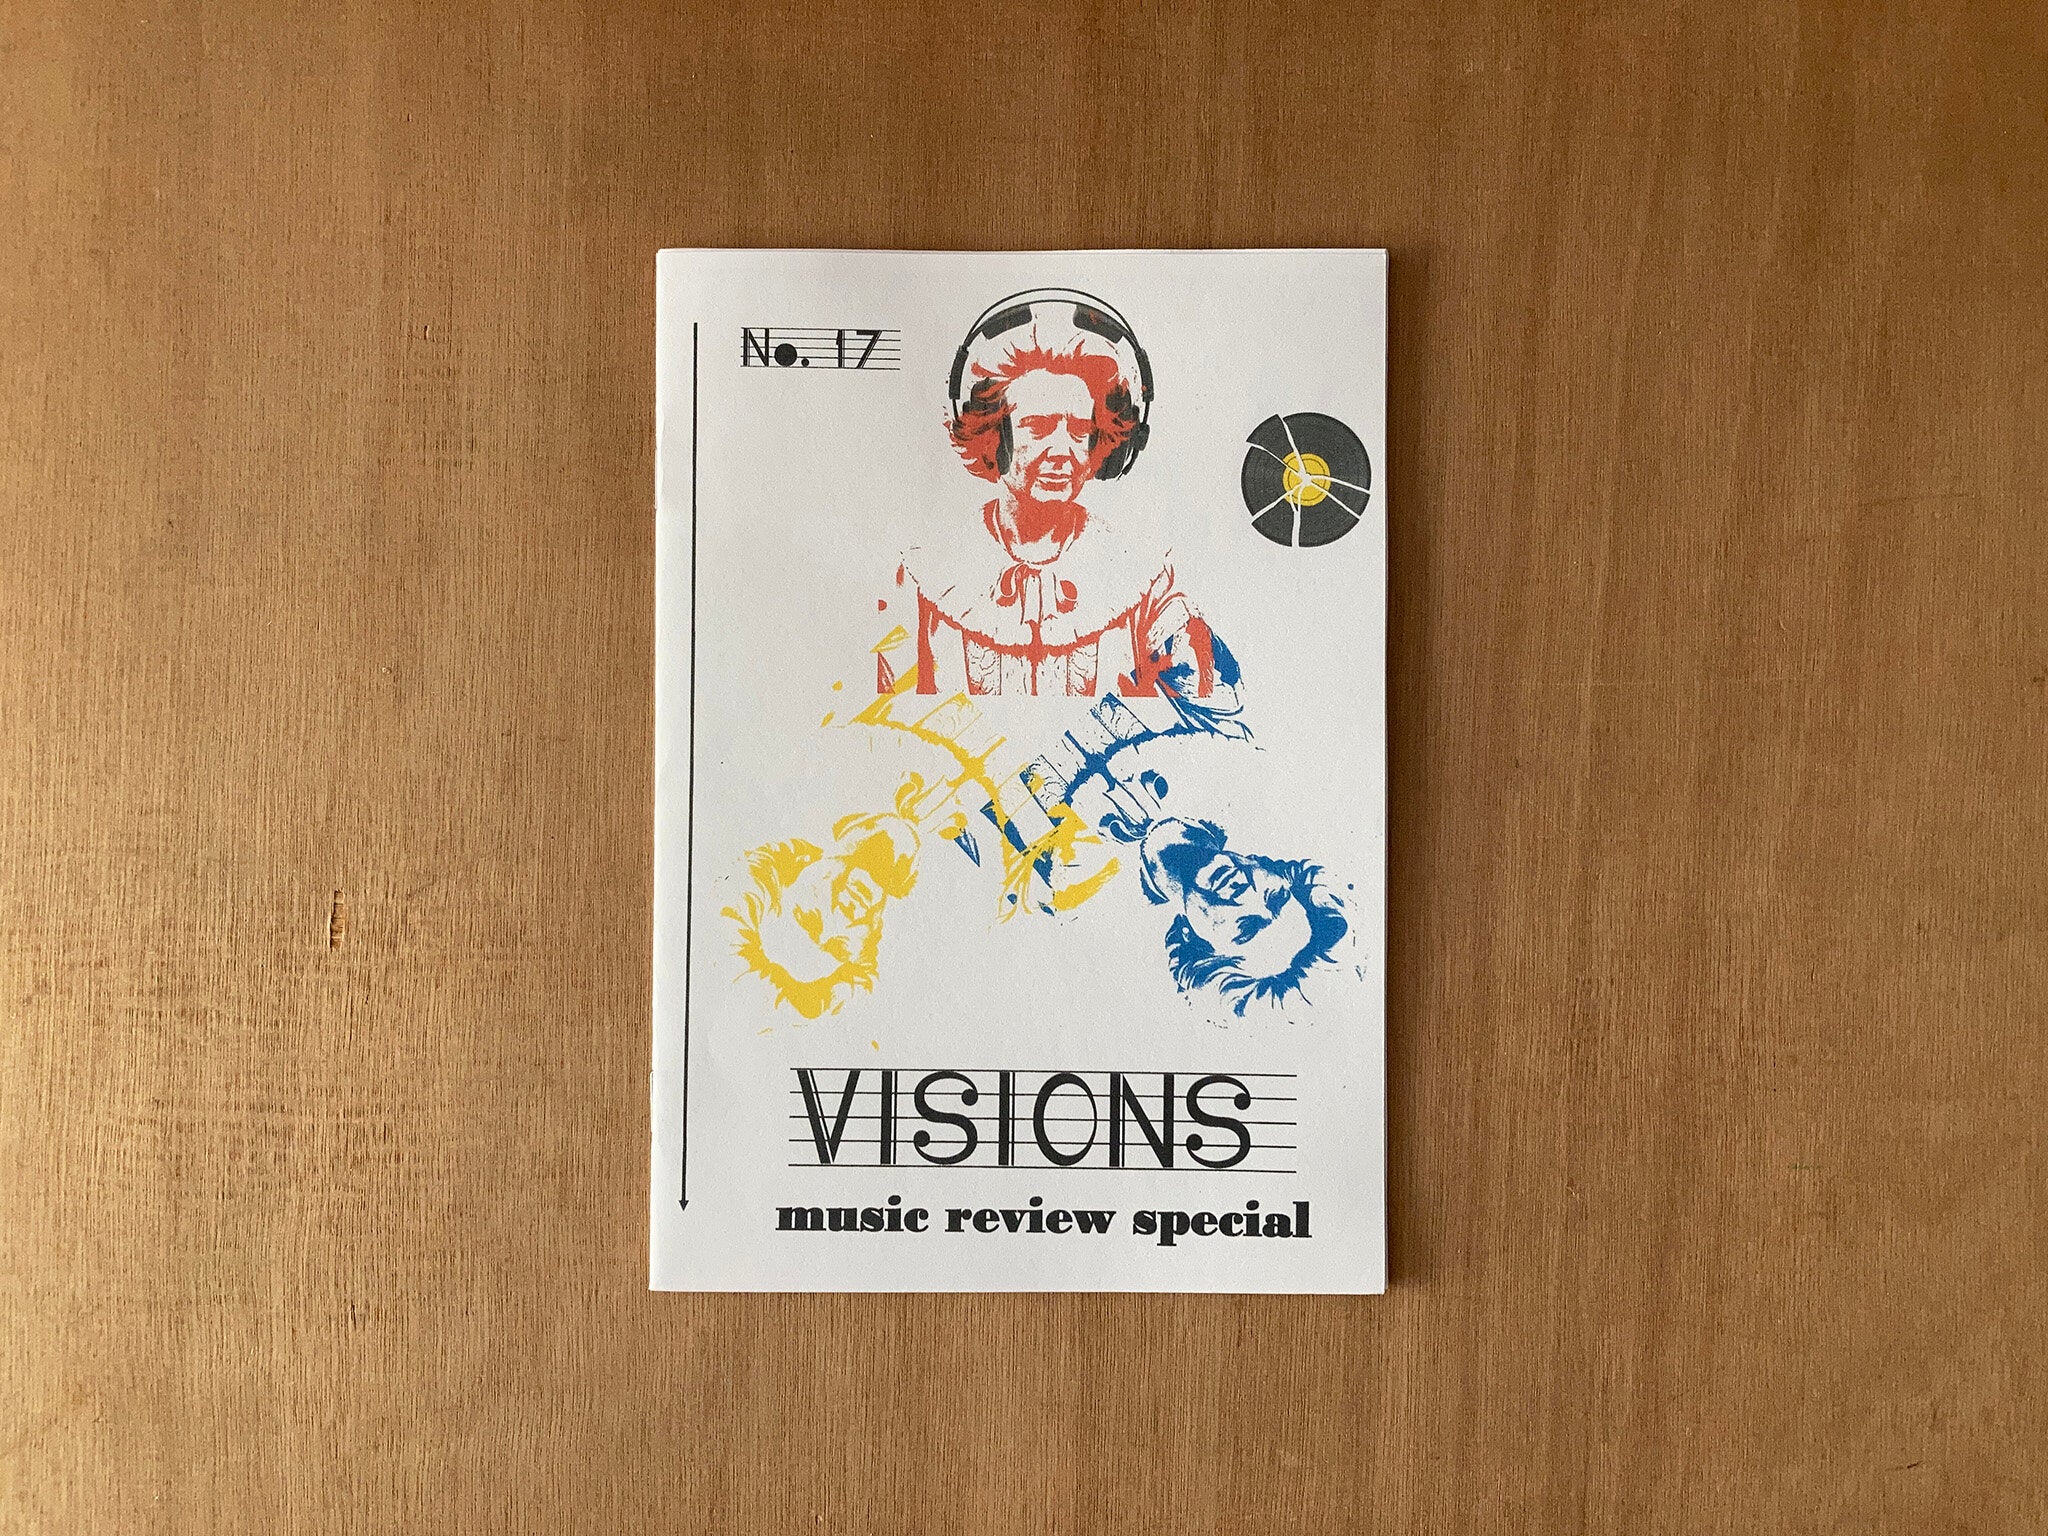 VISIONS #17 by Dave Emmerson